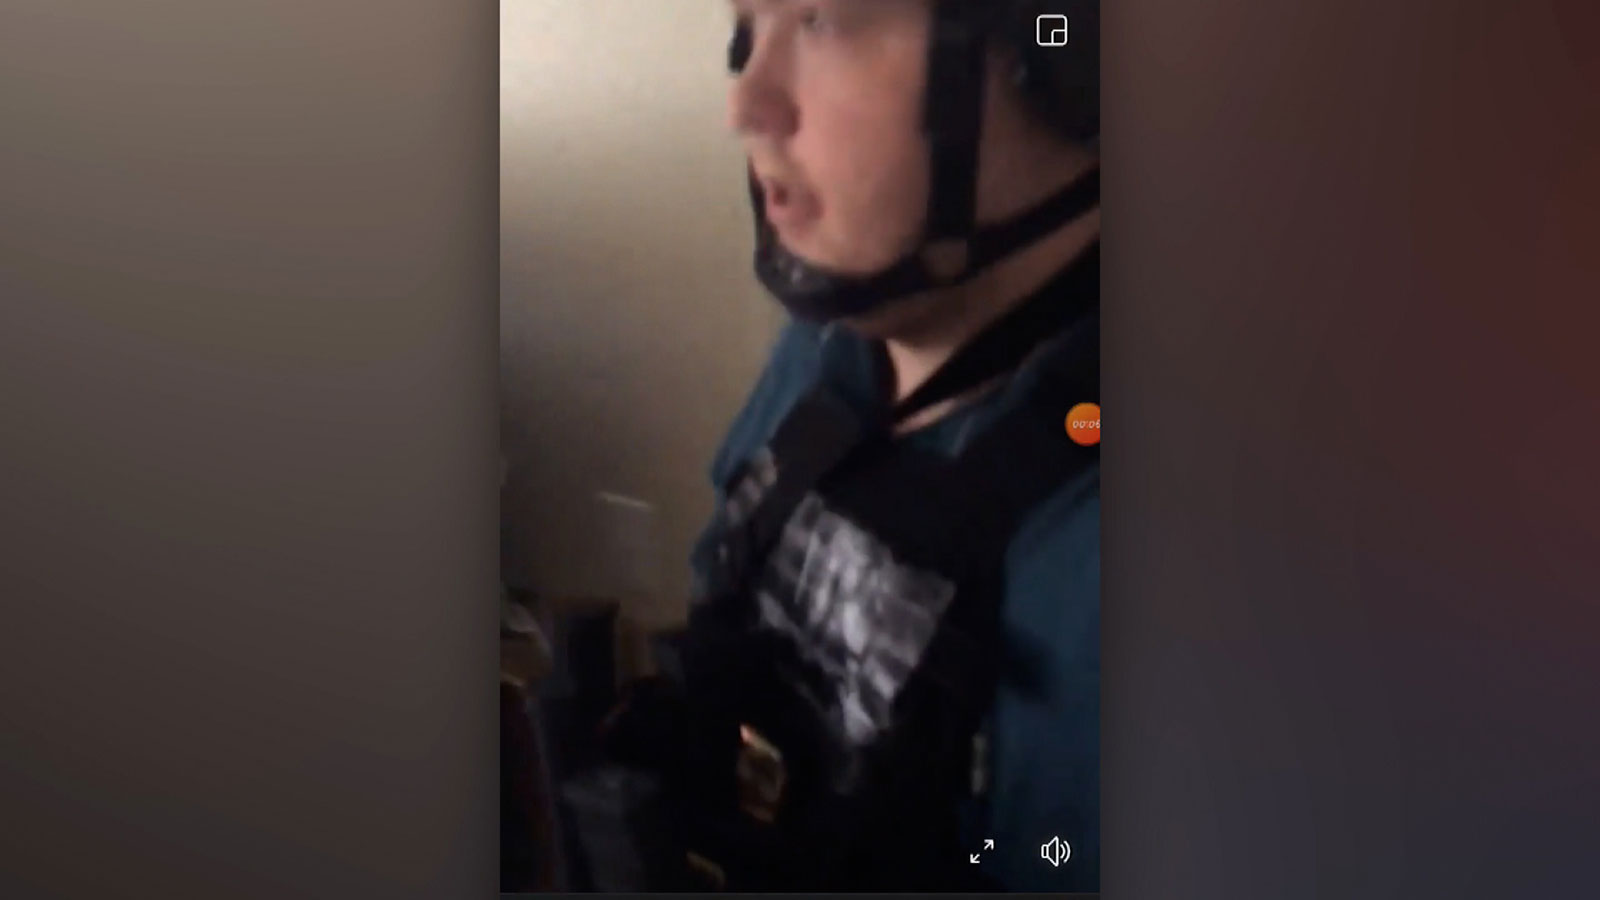 New video obtained by CNN appears to show Anderson Lee Aldrich ranting about police during a standoff in 2021.